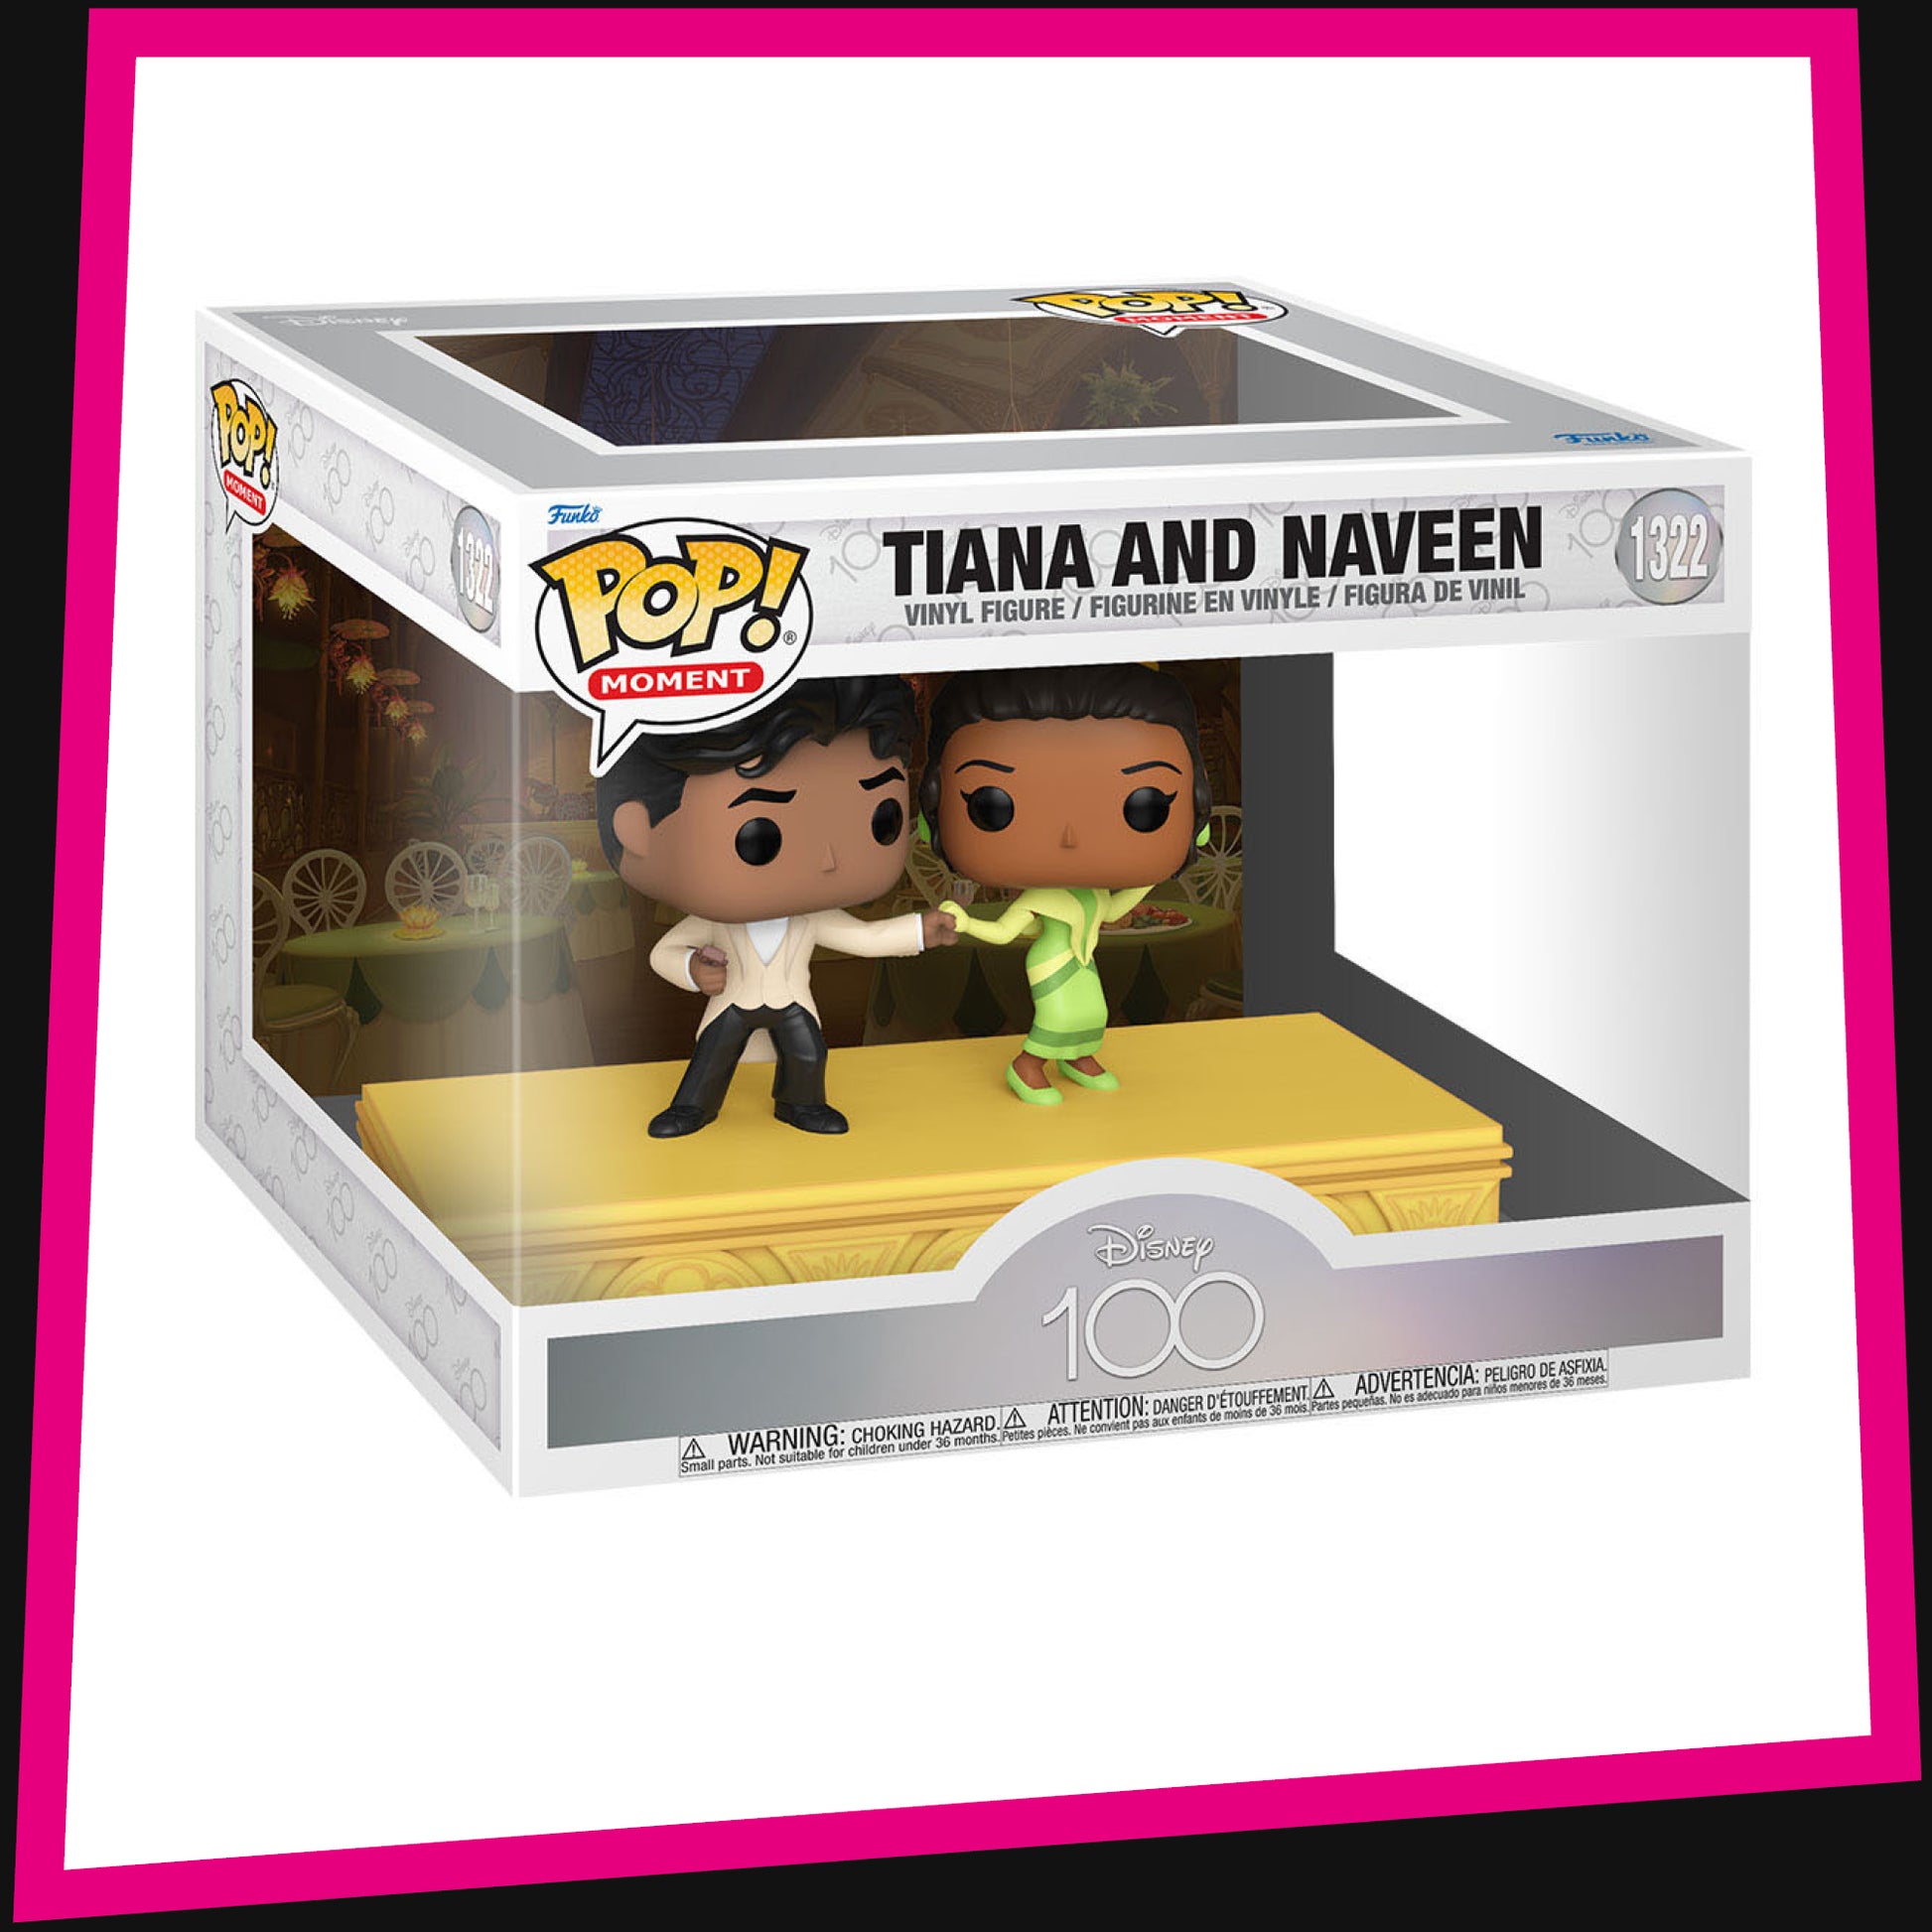 Tiana and Naveen - Disney 100 Anniversary #1322 Funko POP! Vinyl Momen –  Derek\'s Toy Barn - New and Pre-Owned Toys & Collectibles